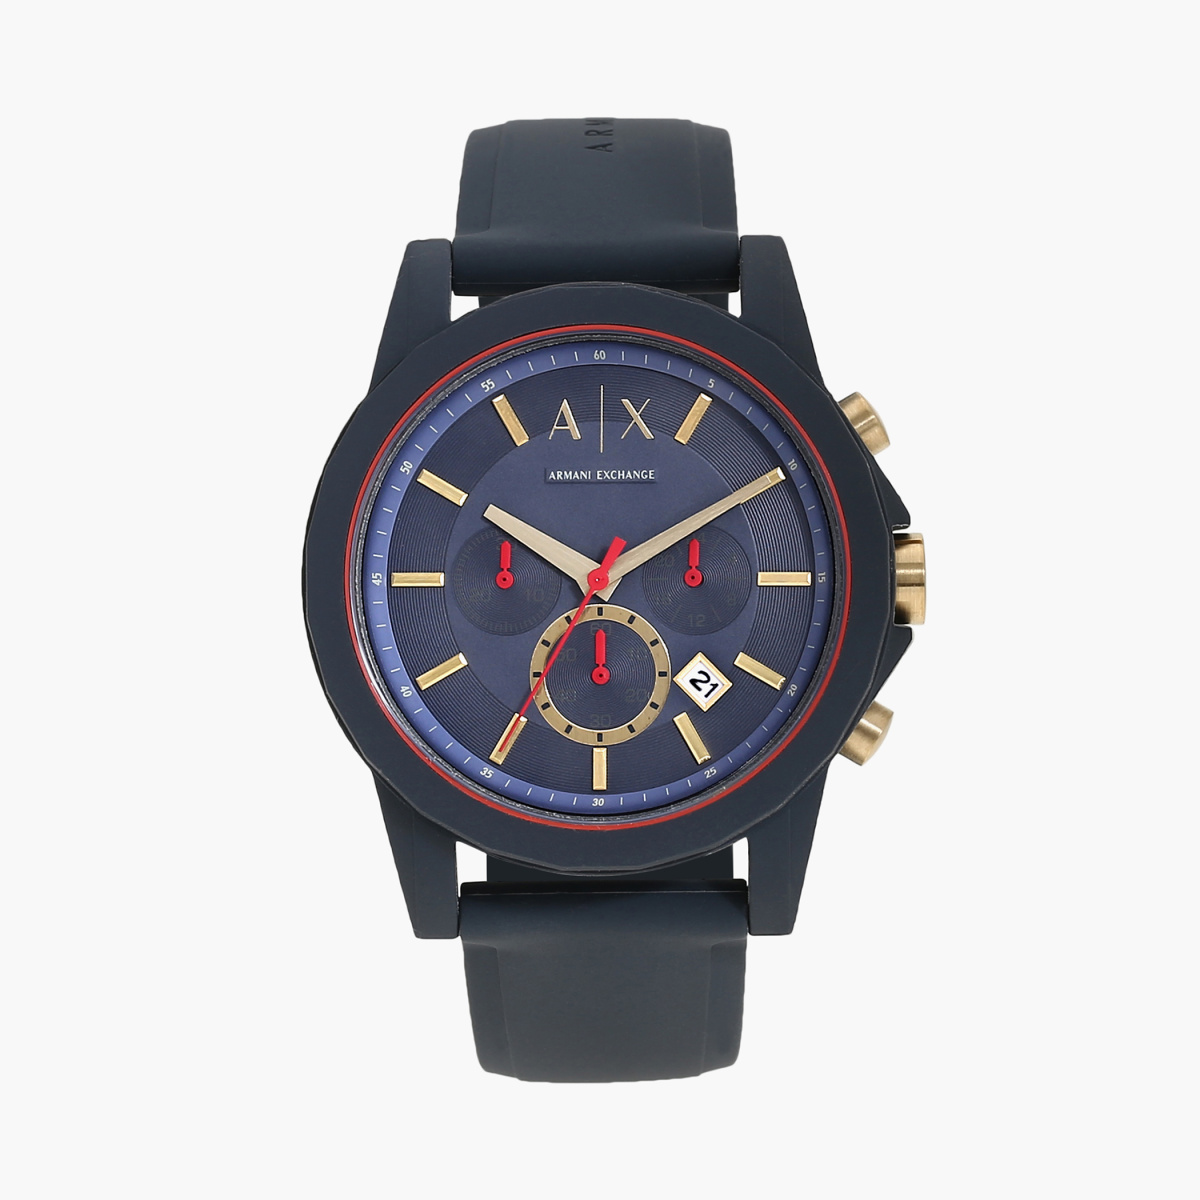 ARMANI EXCHANGE Men Analog Watch with Silicone Strap - AX1335I